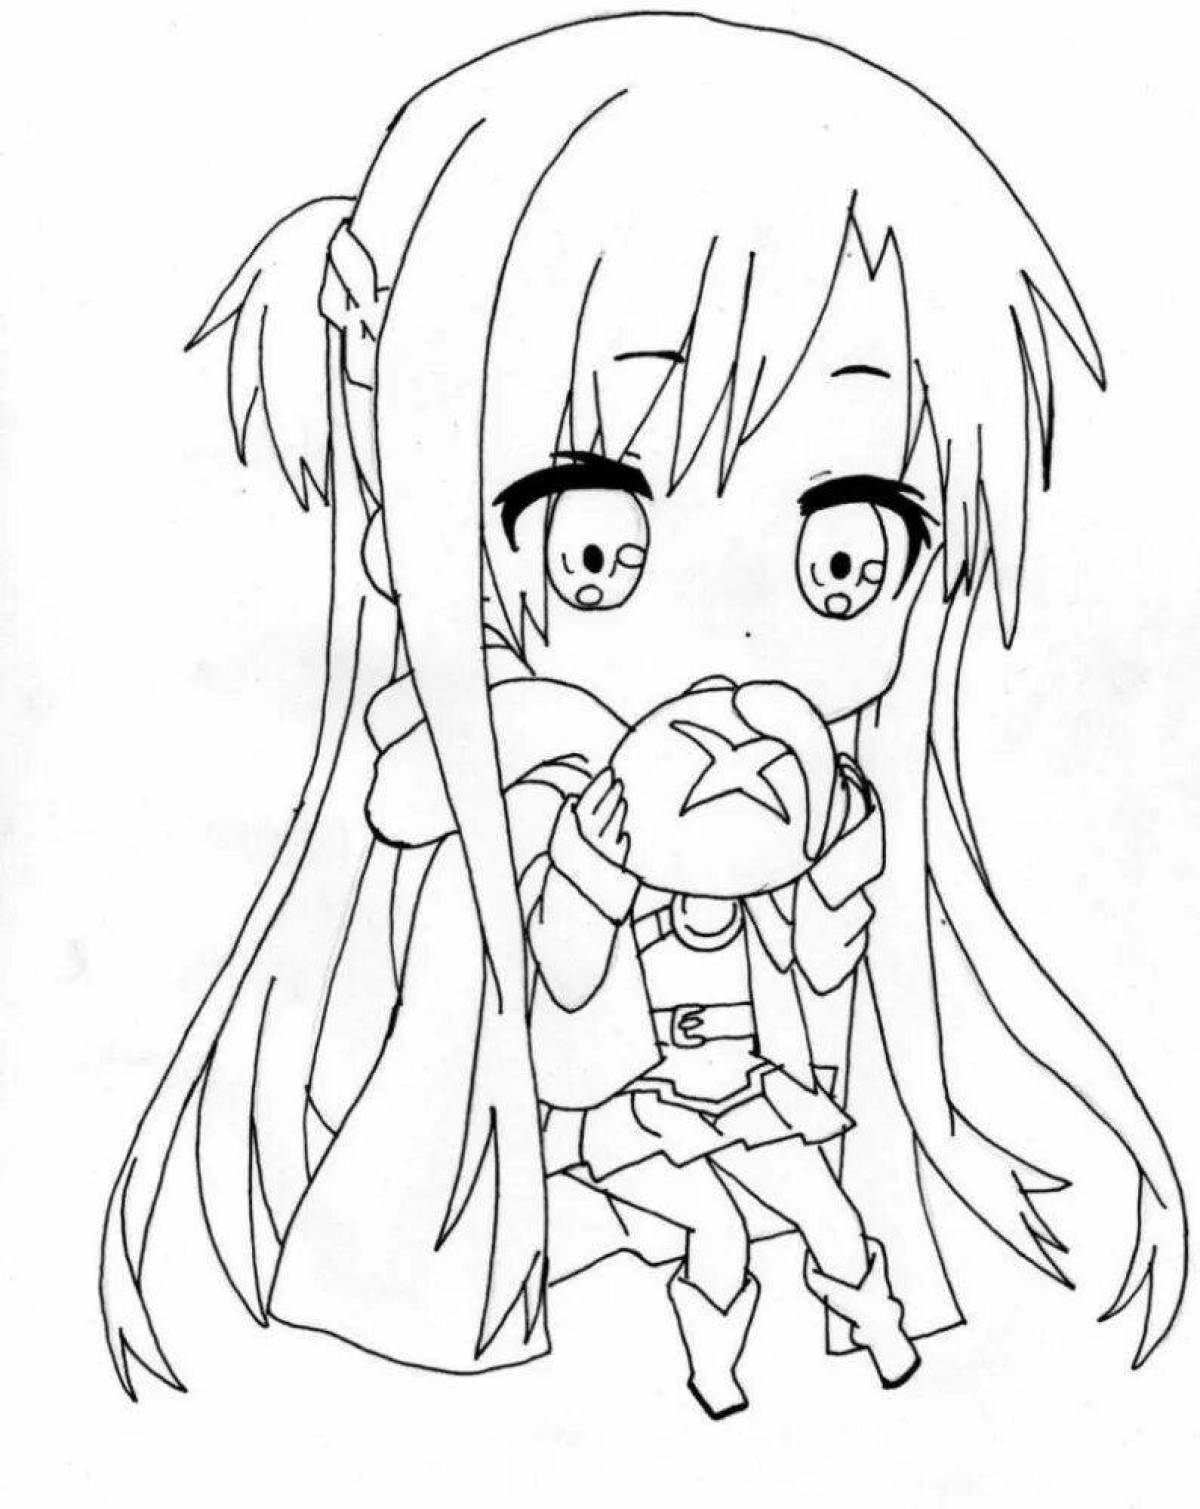 Playful anime sticker coloring page